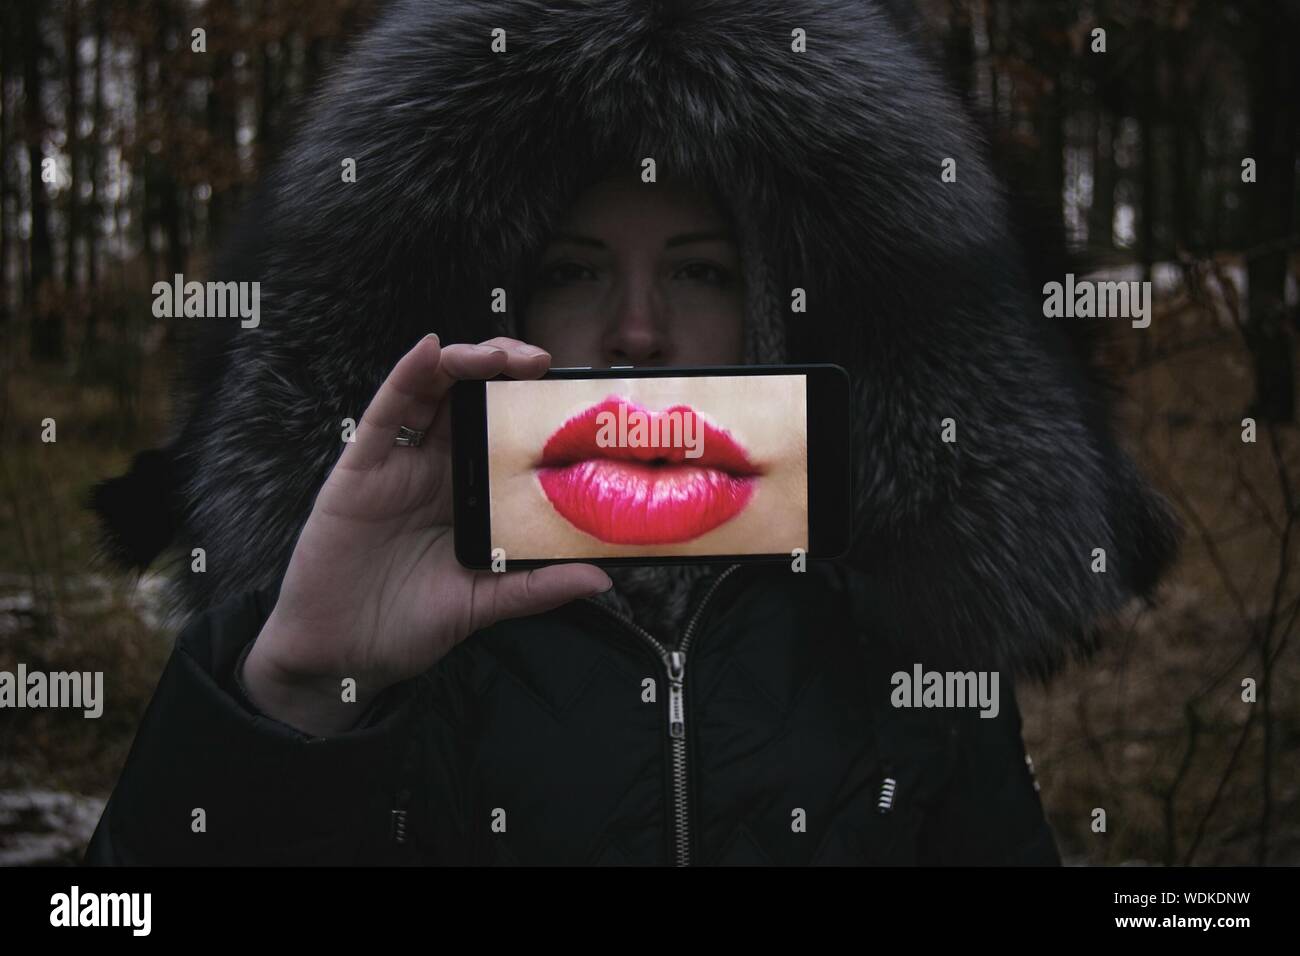 Portrait Of Young Woman Holding Smart Phone Showing Pink Lips In Display During Winter Stock Photo